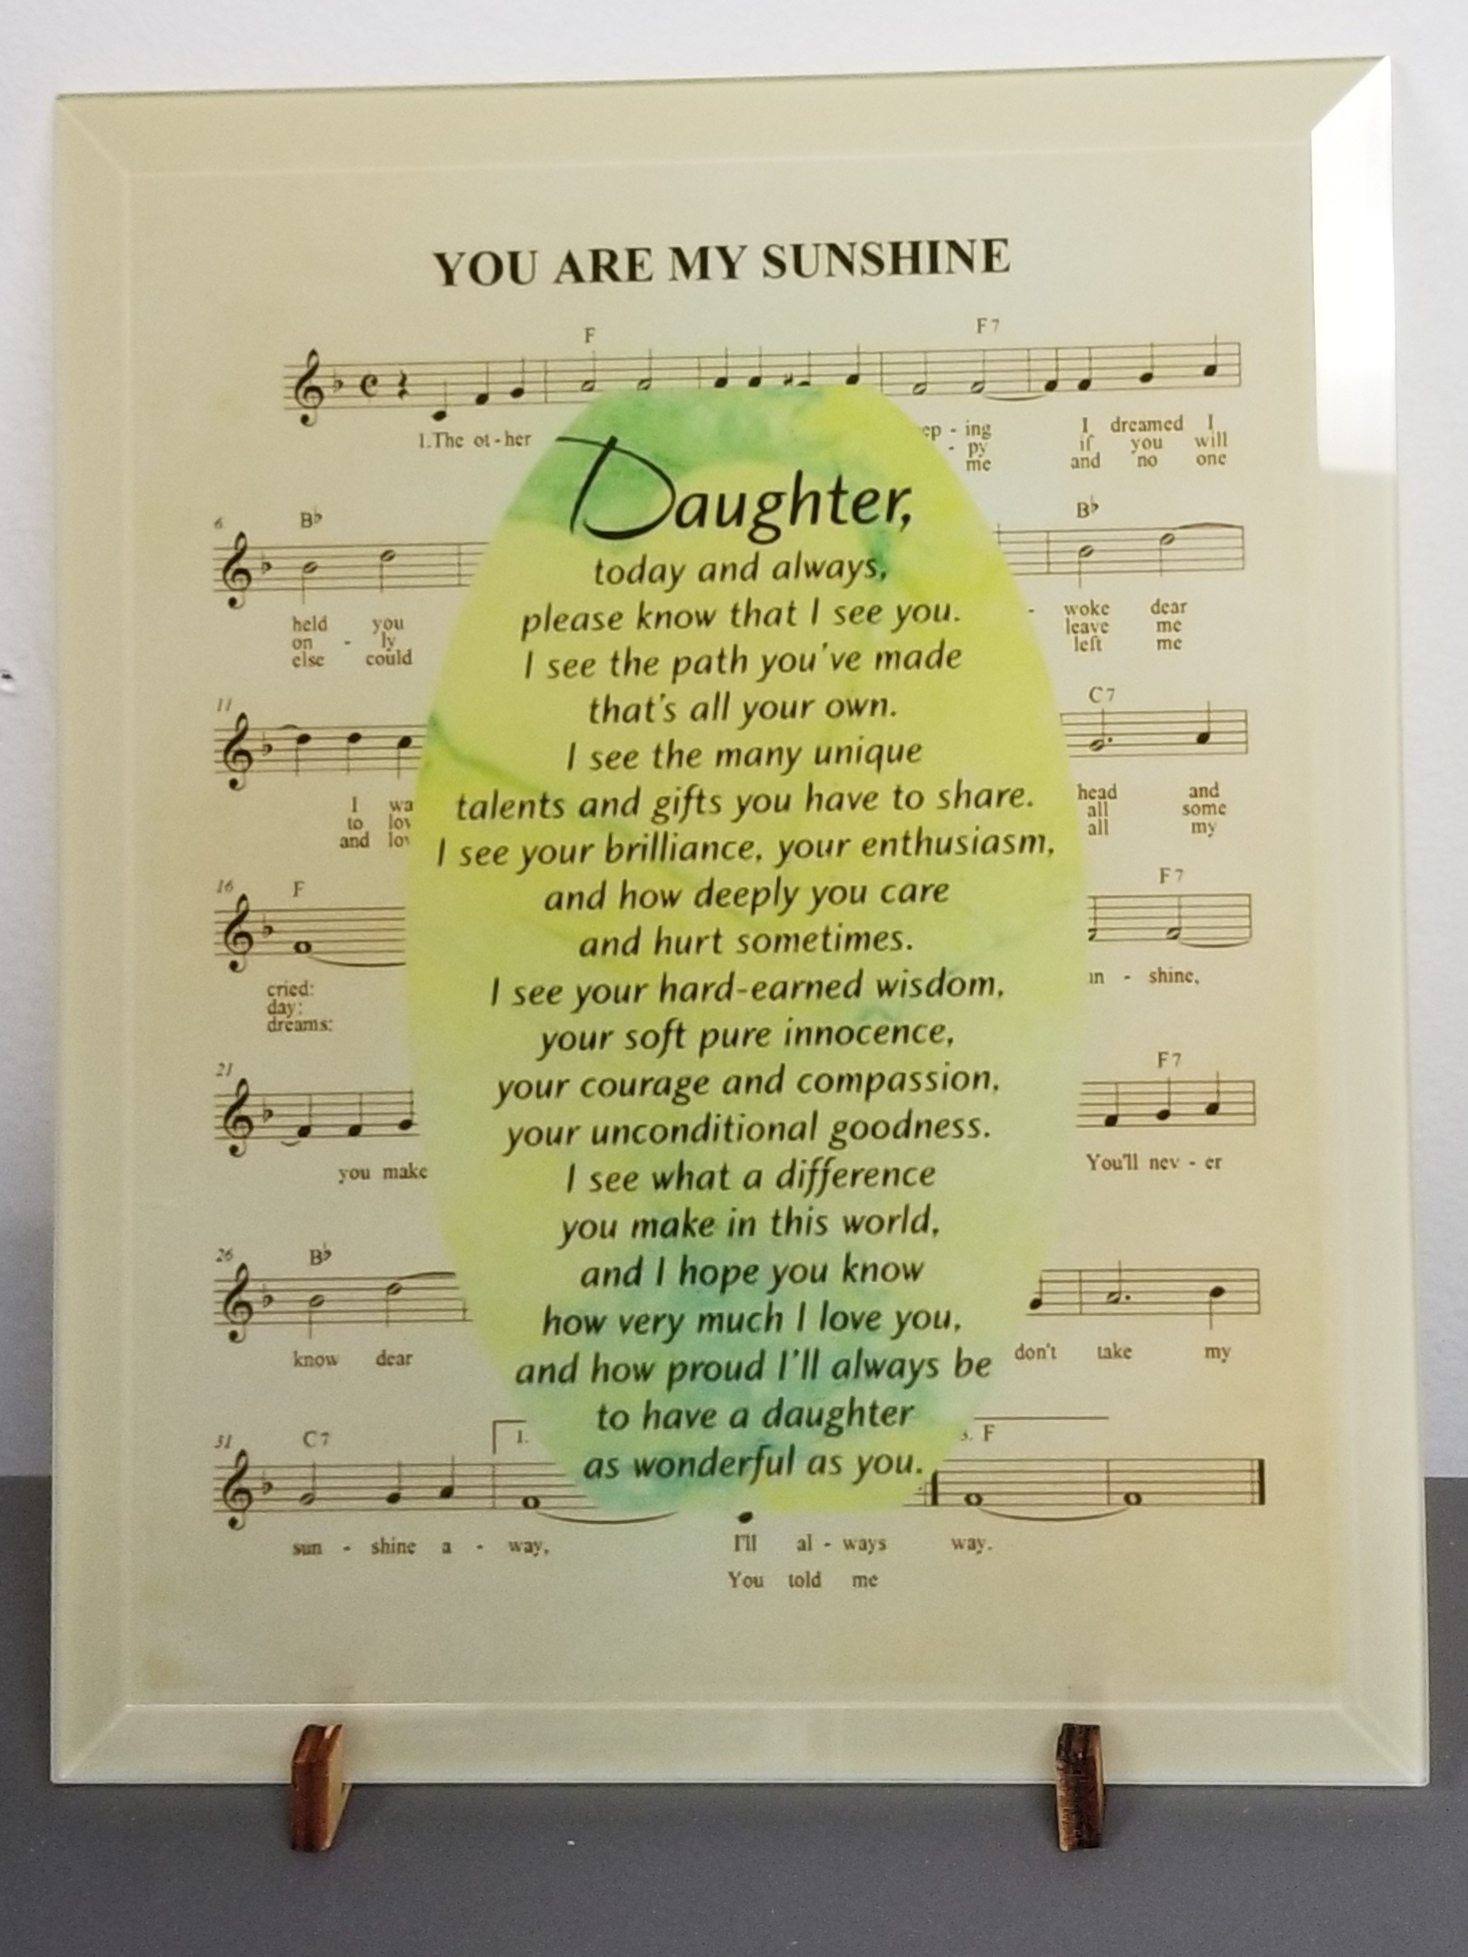 8 x 10 Bevel Glass with music sheet with a poem.